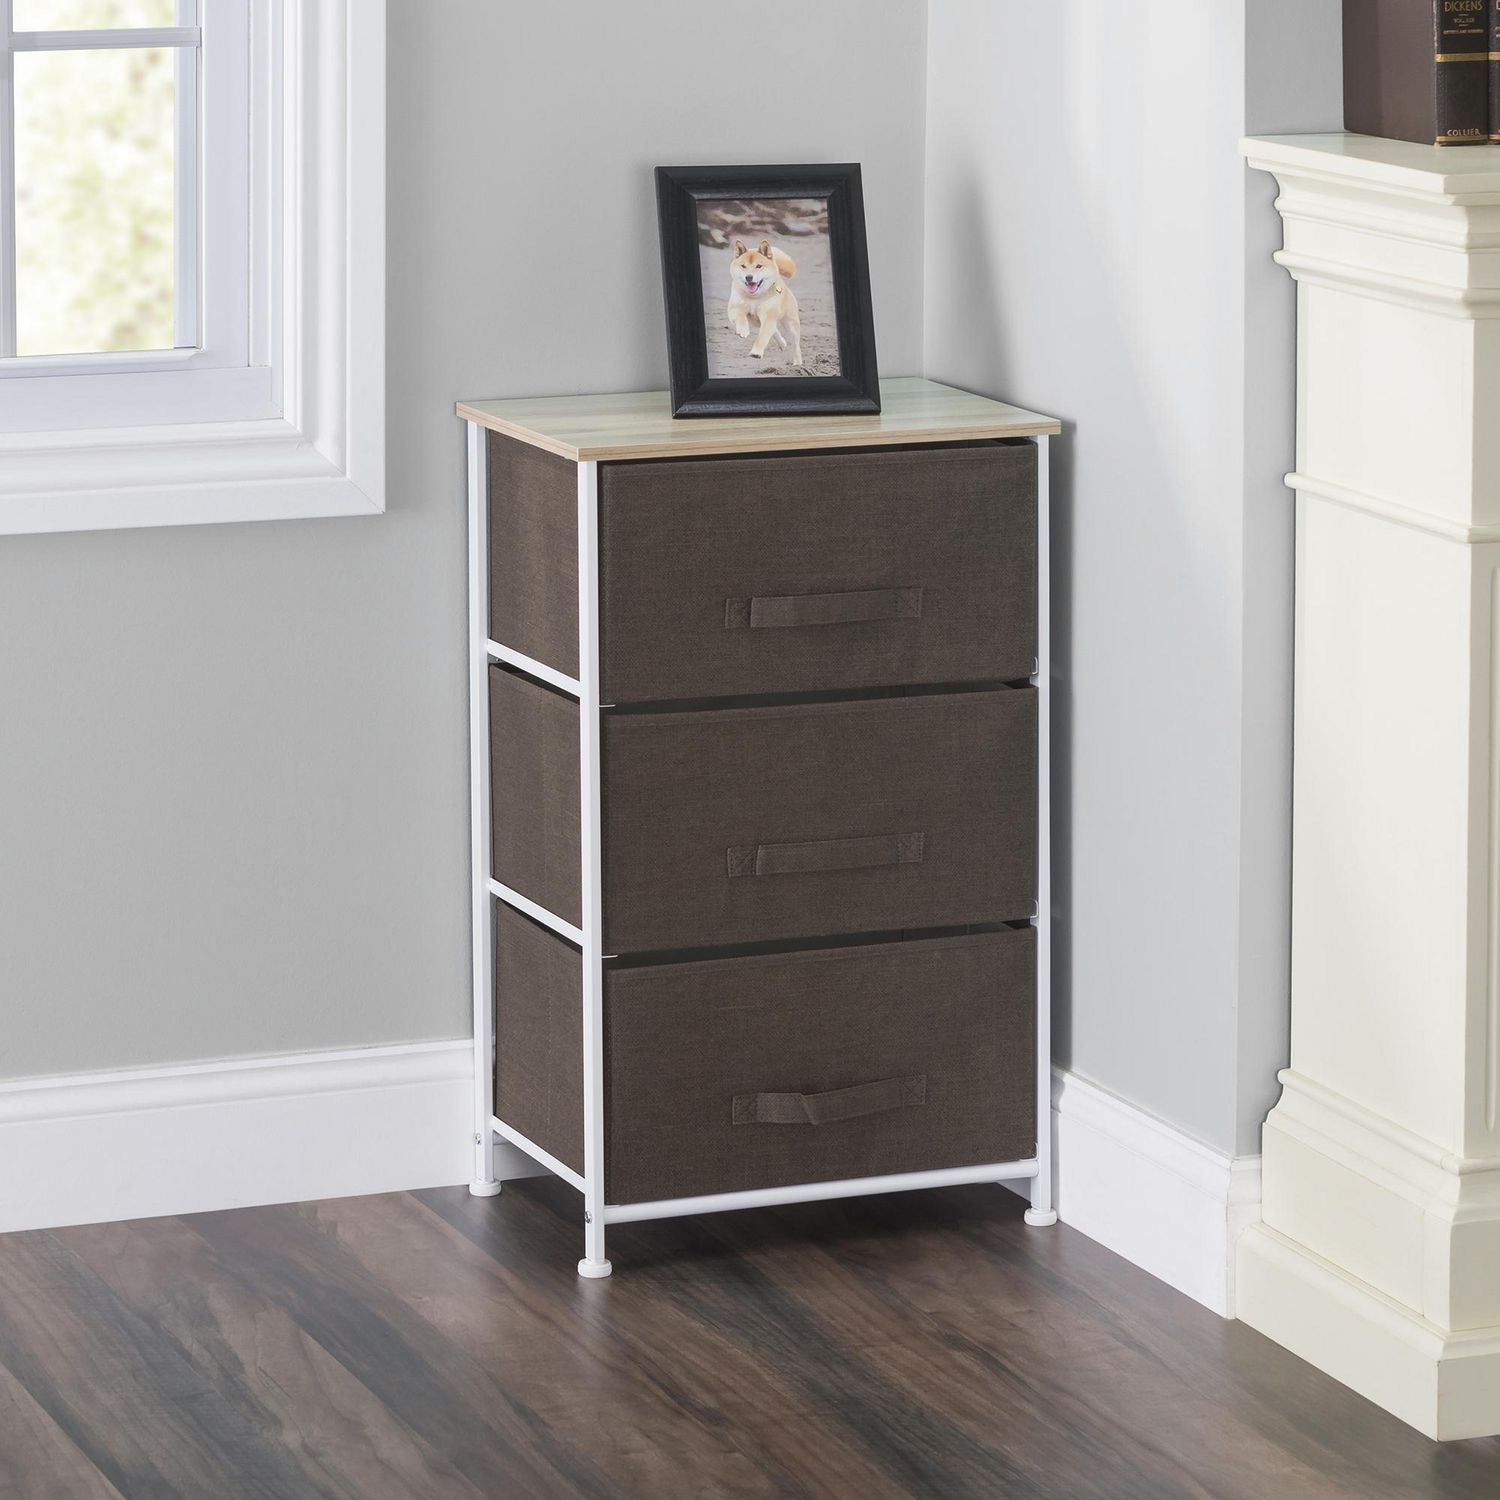 3 Drawer Fabric Dresser Rolling Storage Cart With Wood Top Brown